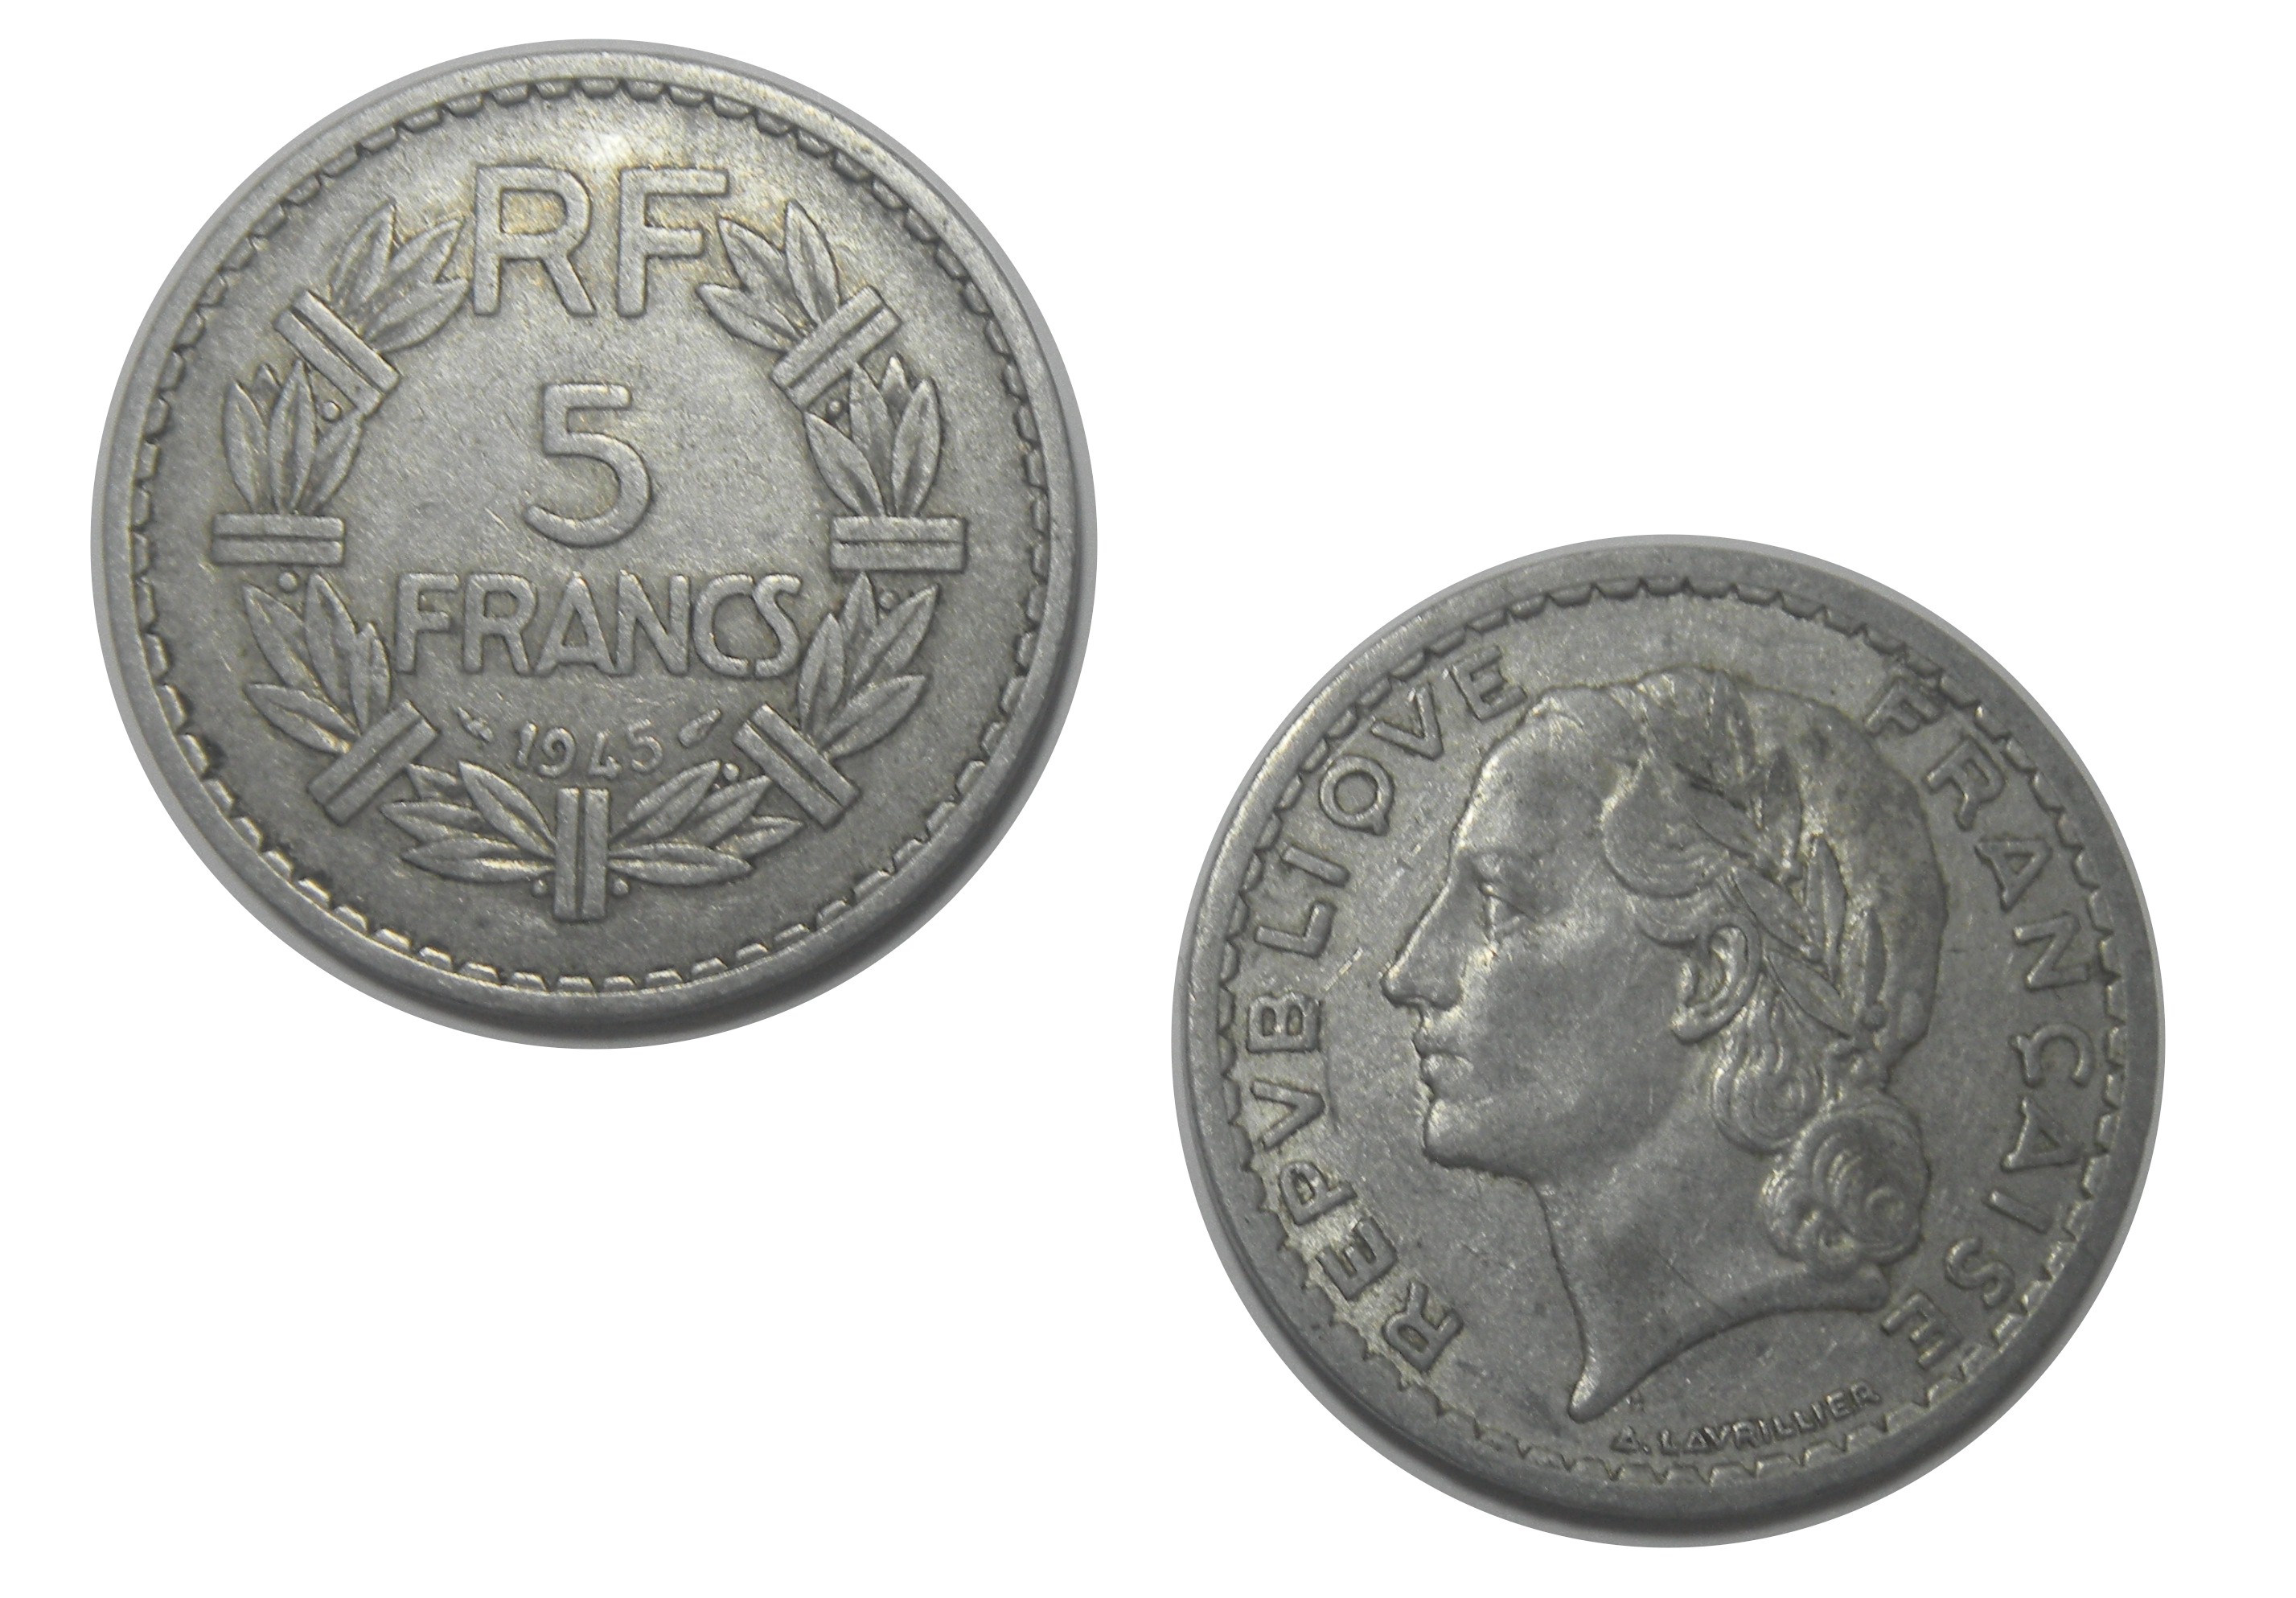 FRENCH RF 5 FRANCS 1945 COIN